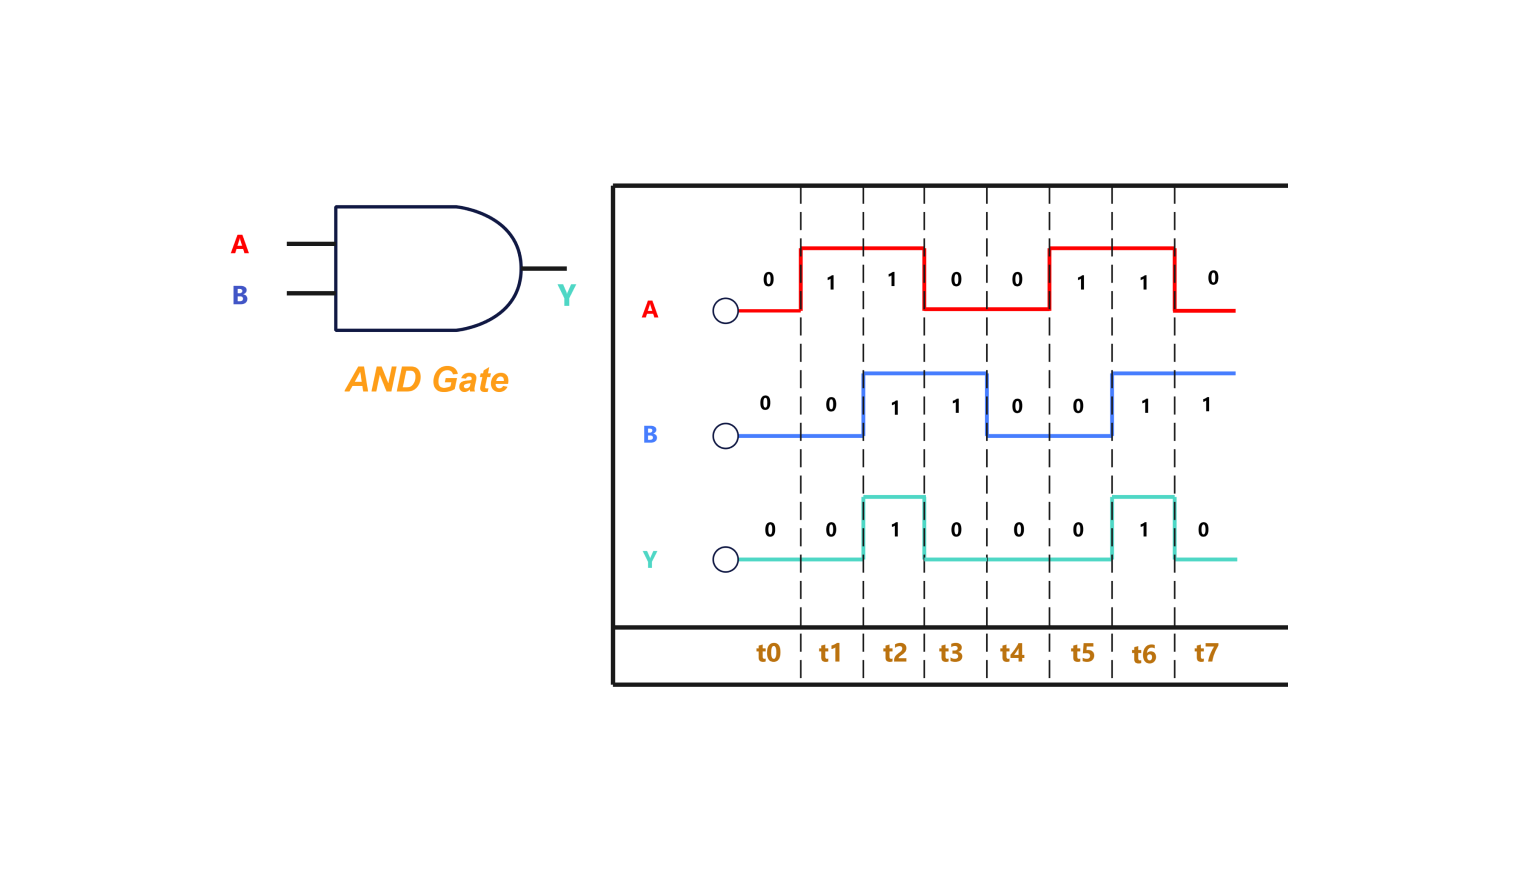 Timing Diagram for operations of AND gate